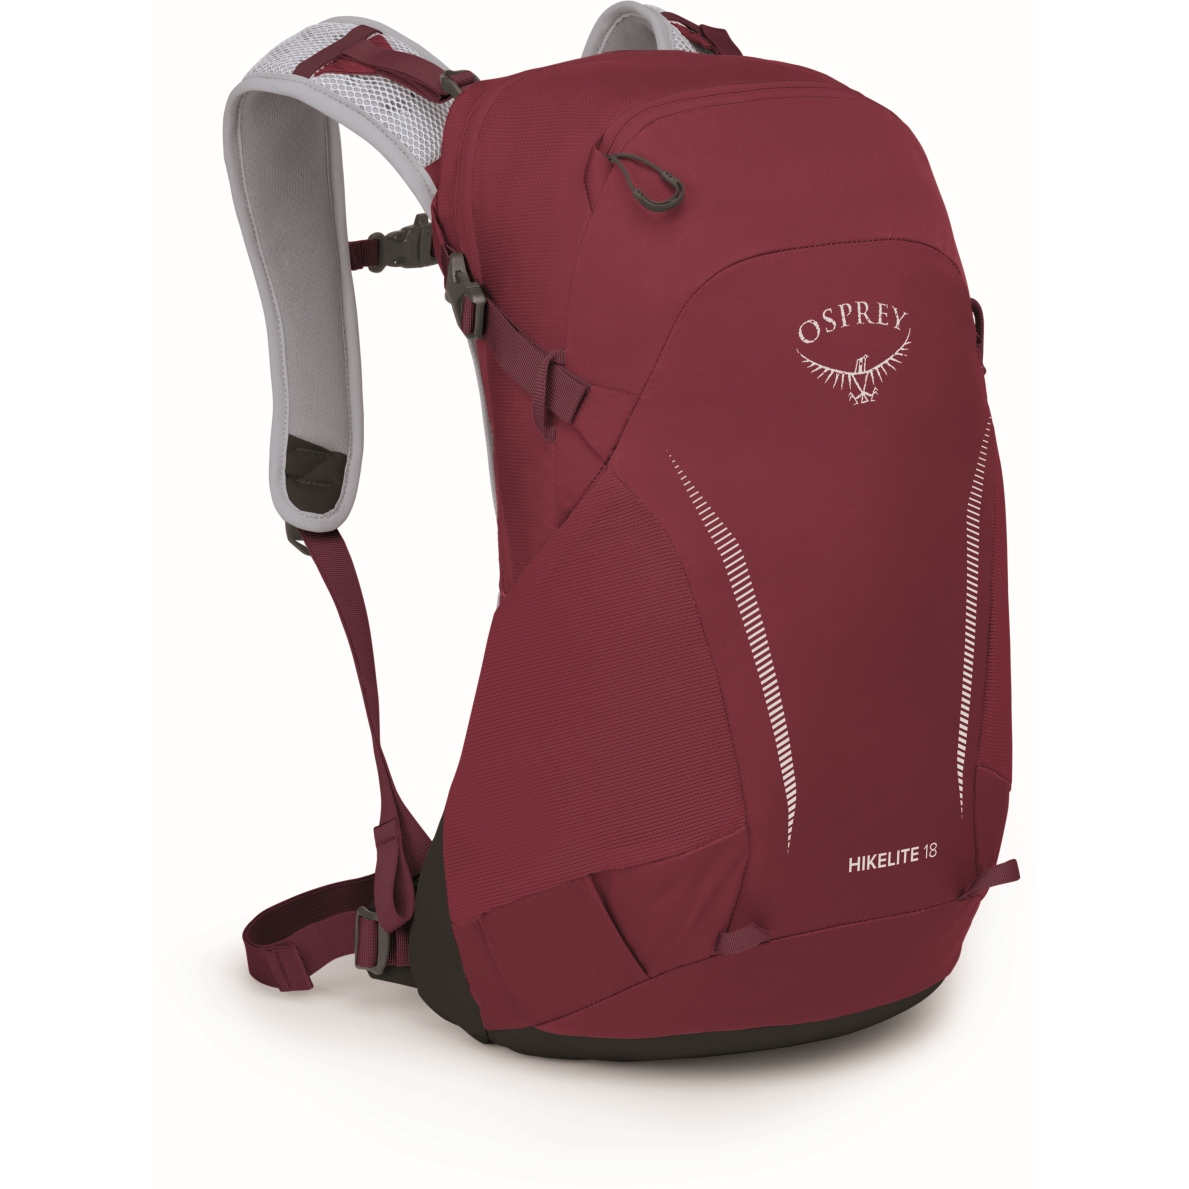 Picture of Osprey Hikelite 18 Backpack - Sangria Red